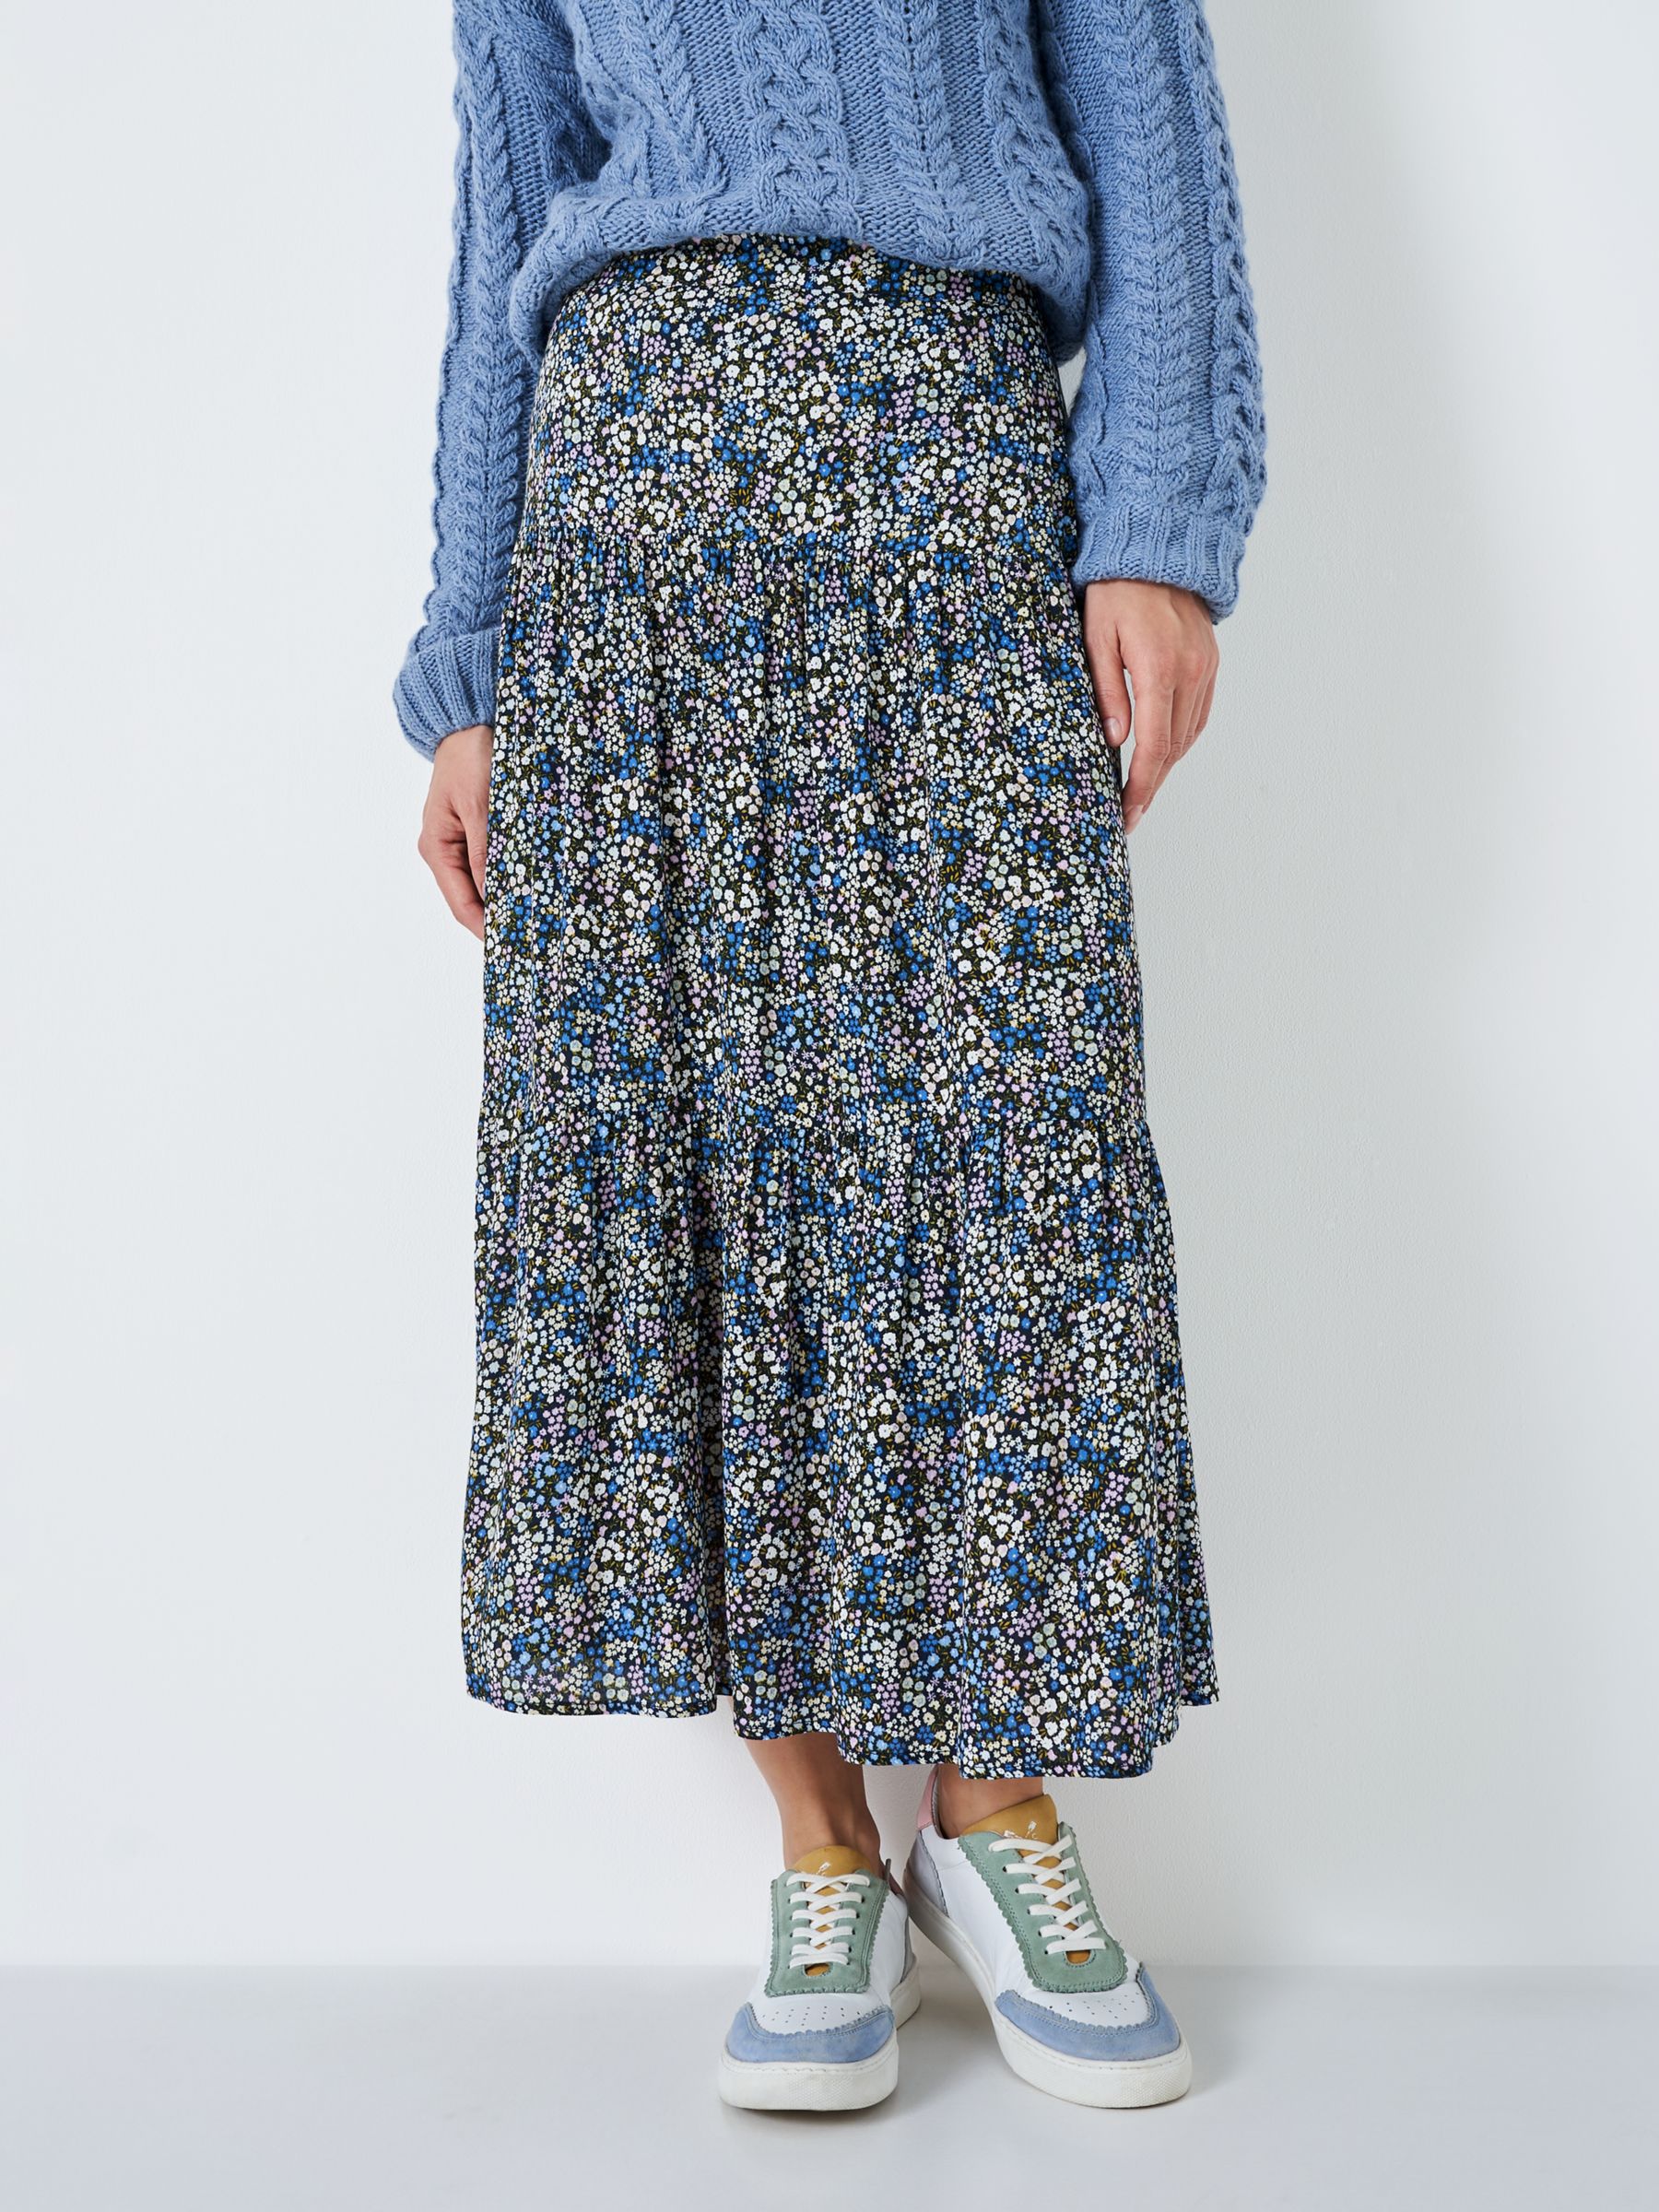 Crew Clothing Sienna Tiered Skirt, Blue/Multi at John Lewis & Partners